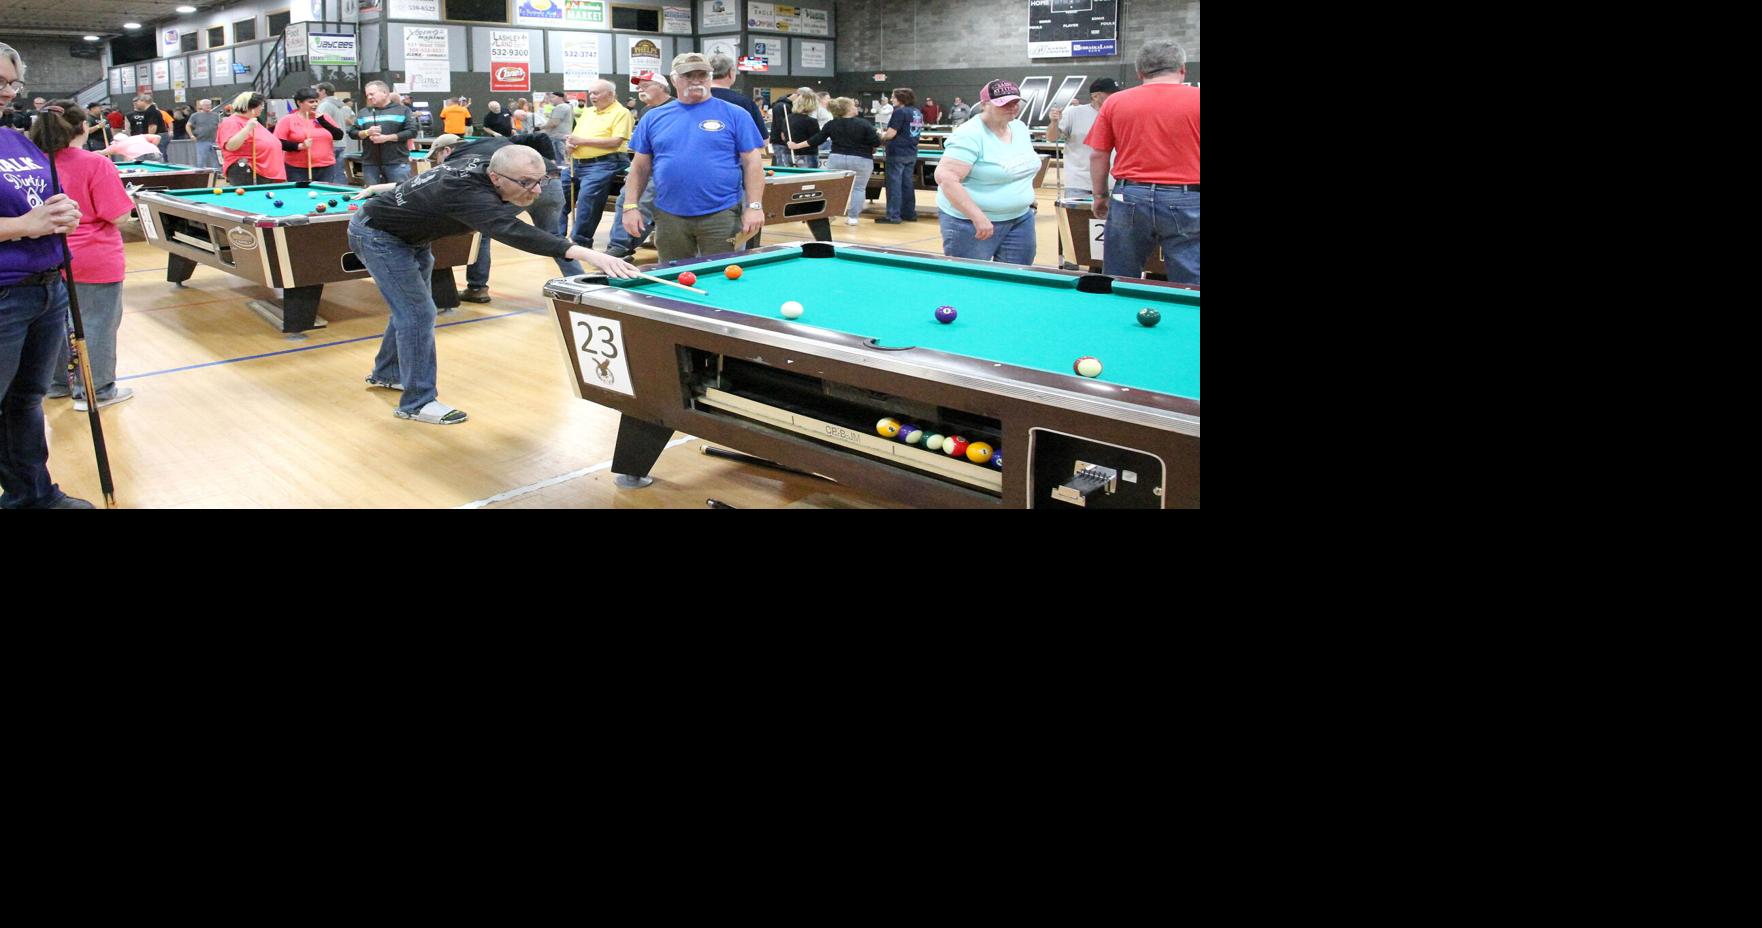 Straight shooting North Platte hosts Eagles State pool tournament